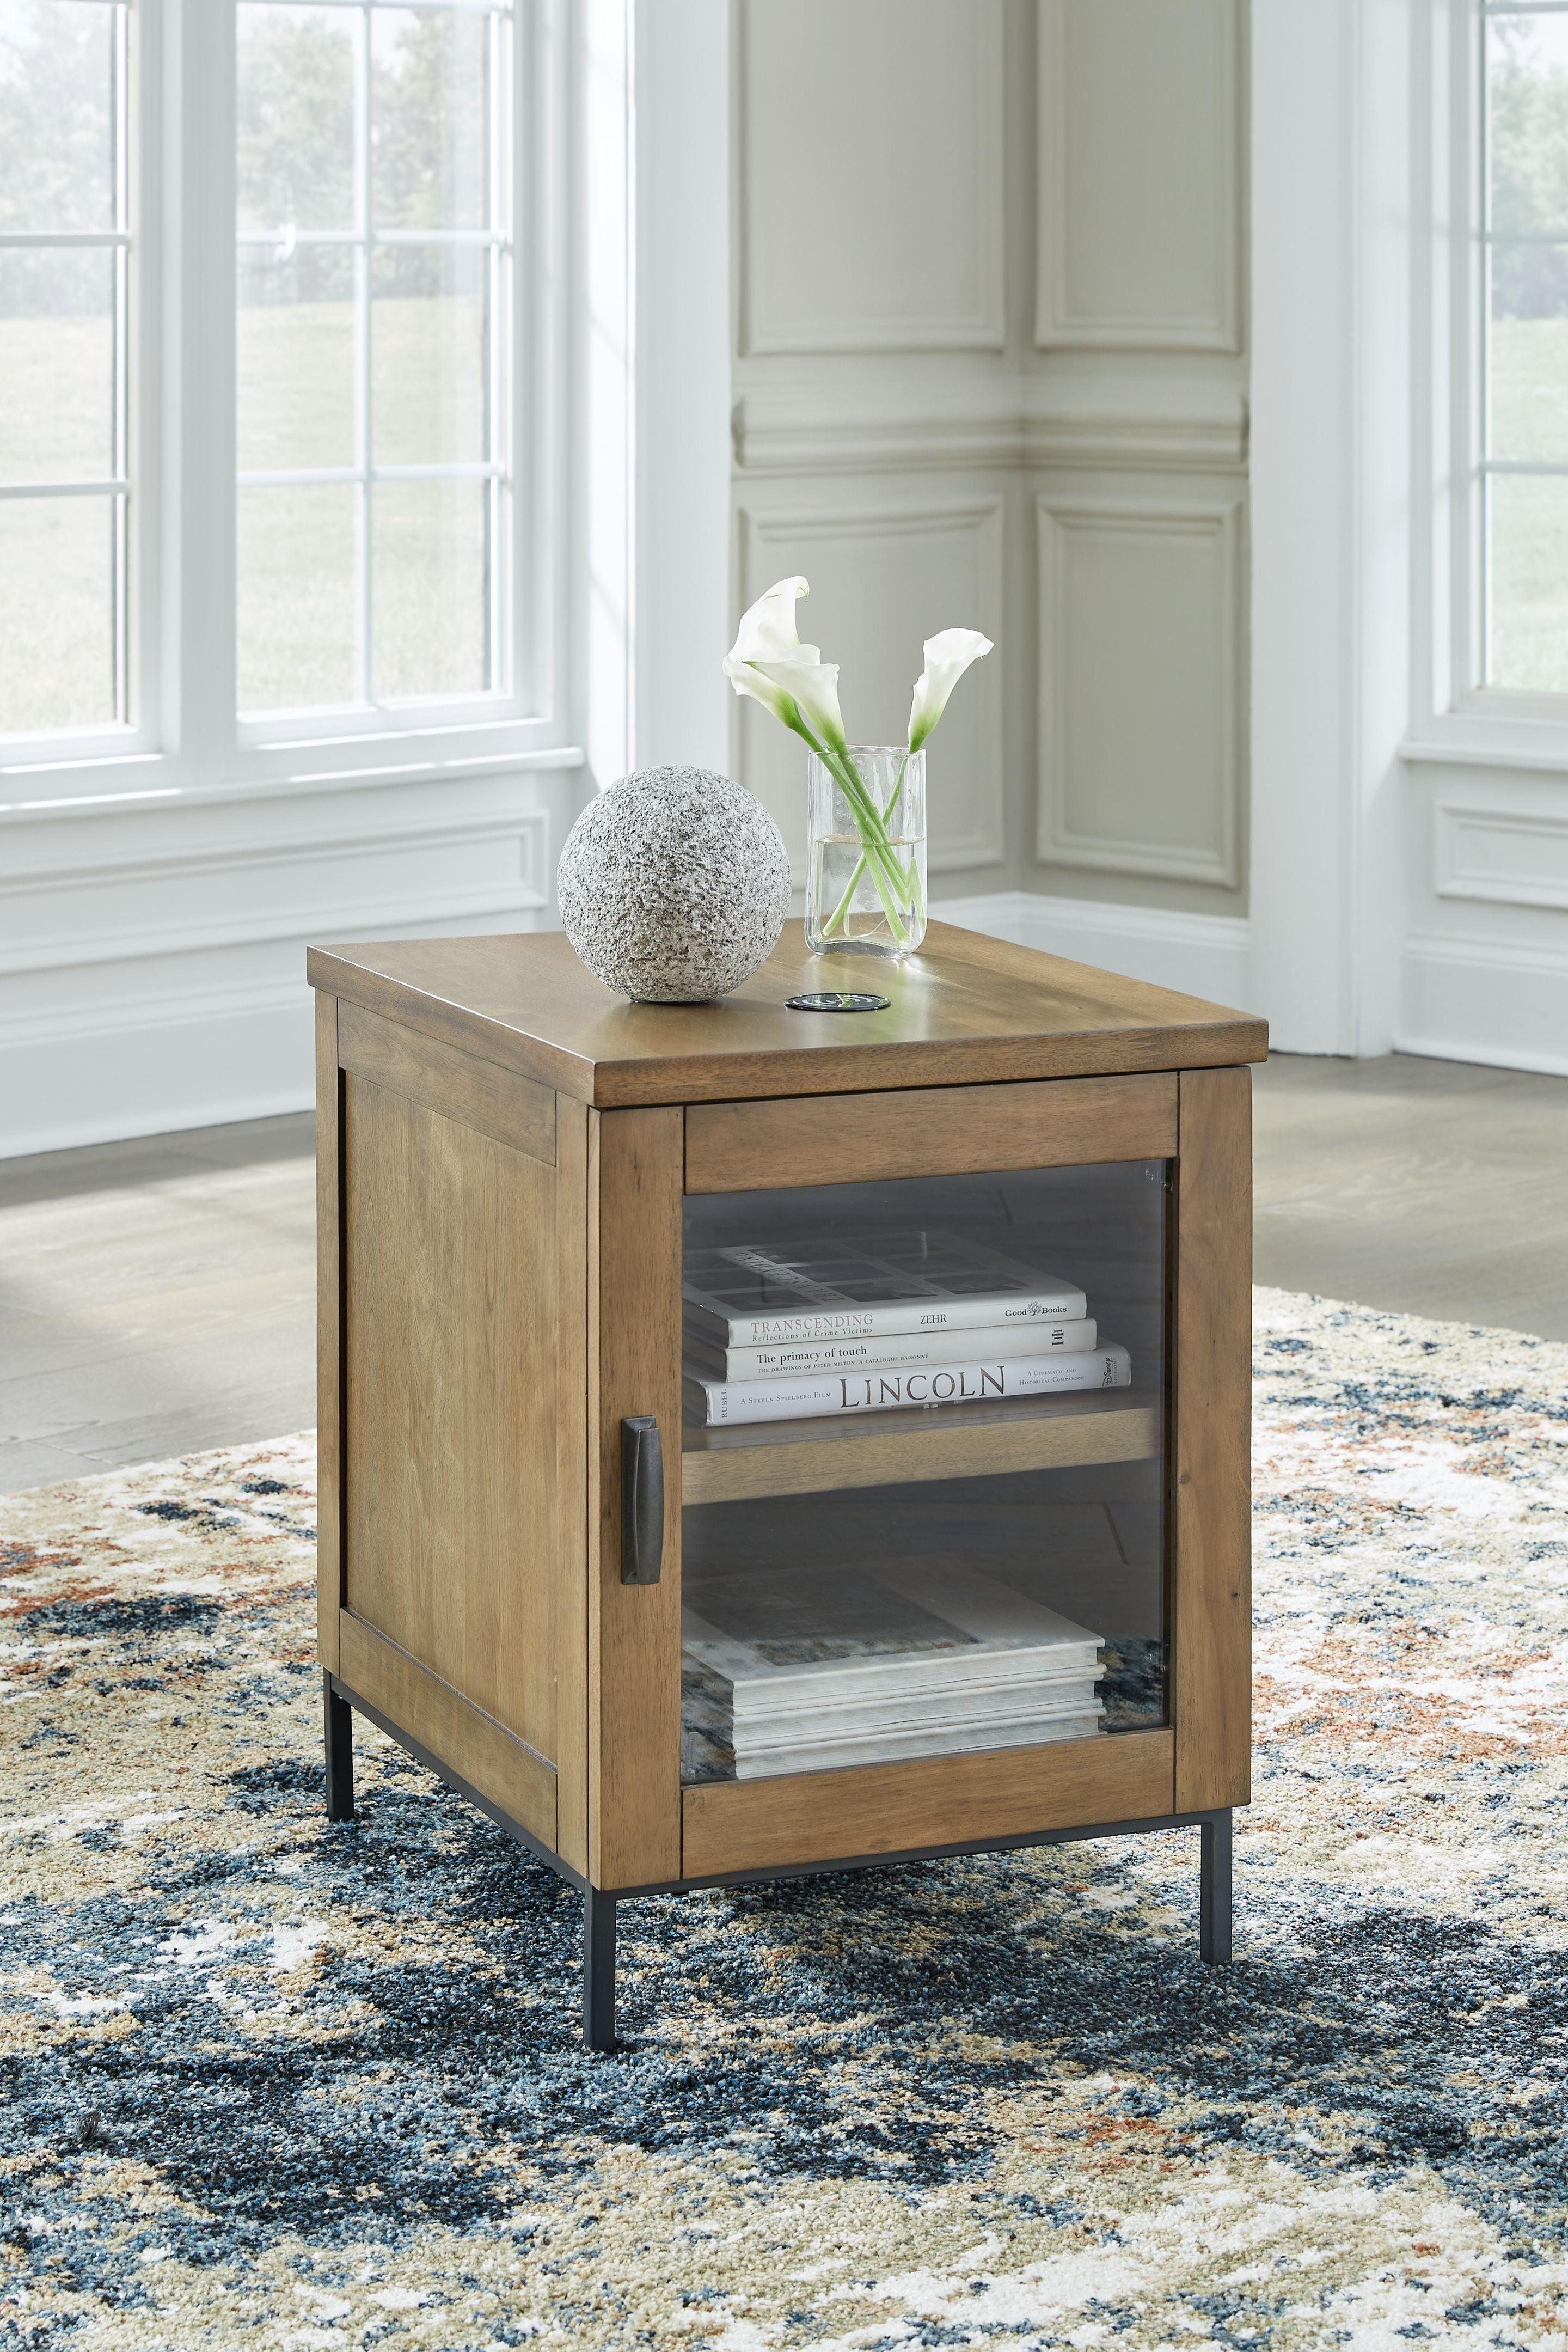 Signature Design by Ashley® - Torlanta - Brown - Chair Side End Table - 5th Avenue Furniture